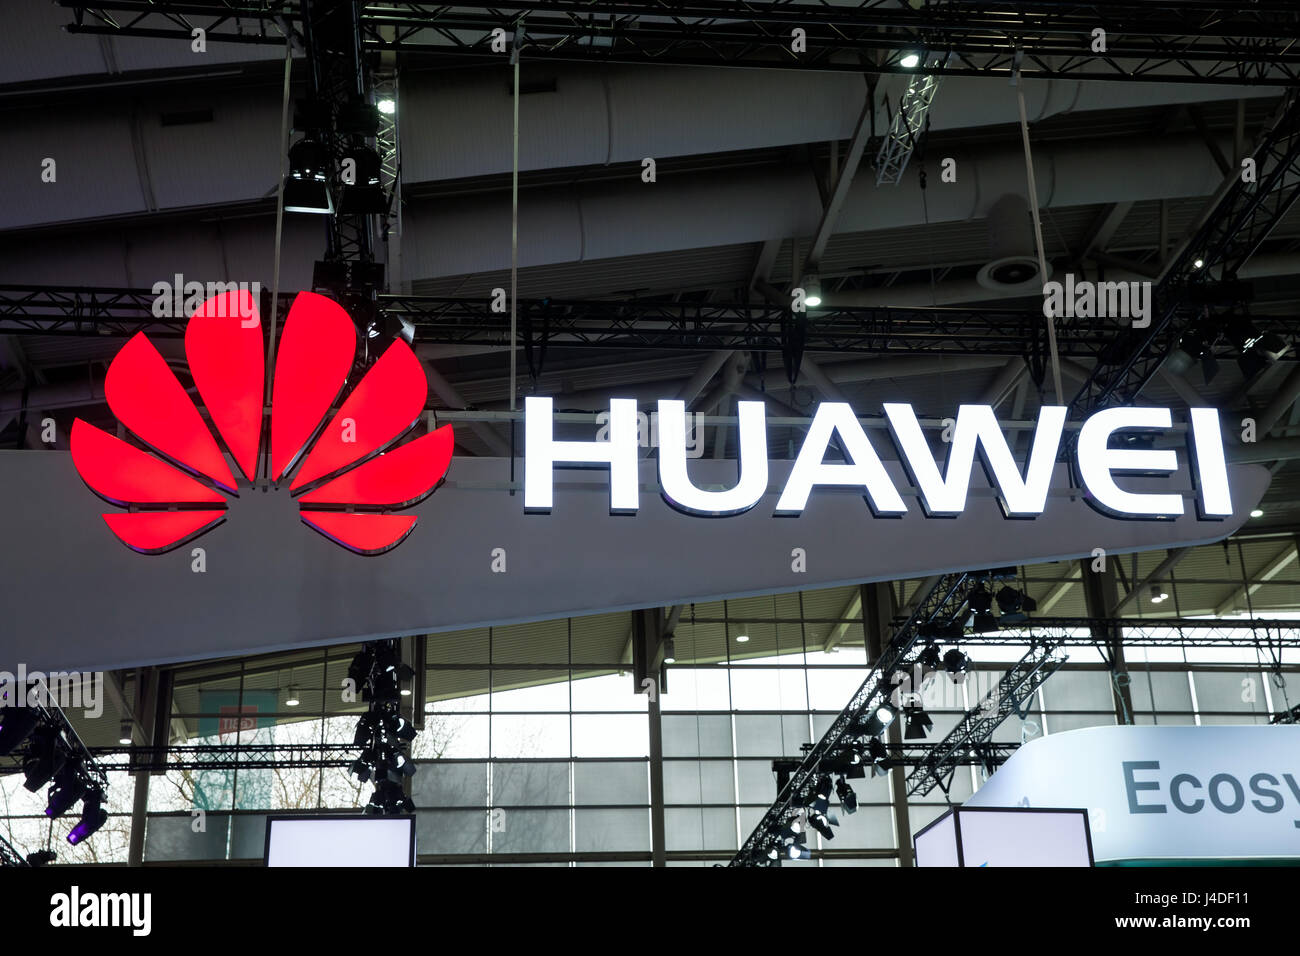 Huawei company logo on the wall. Huawei Technologies Co. is a Chinese multinational networking and telecommunications equipment and services company Stock Photo